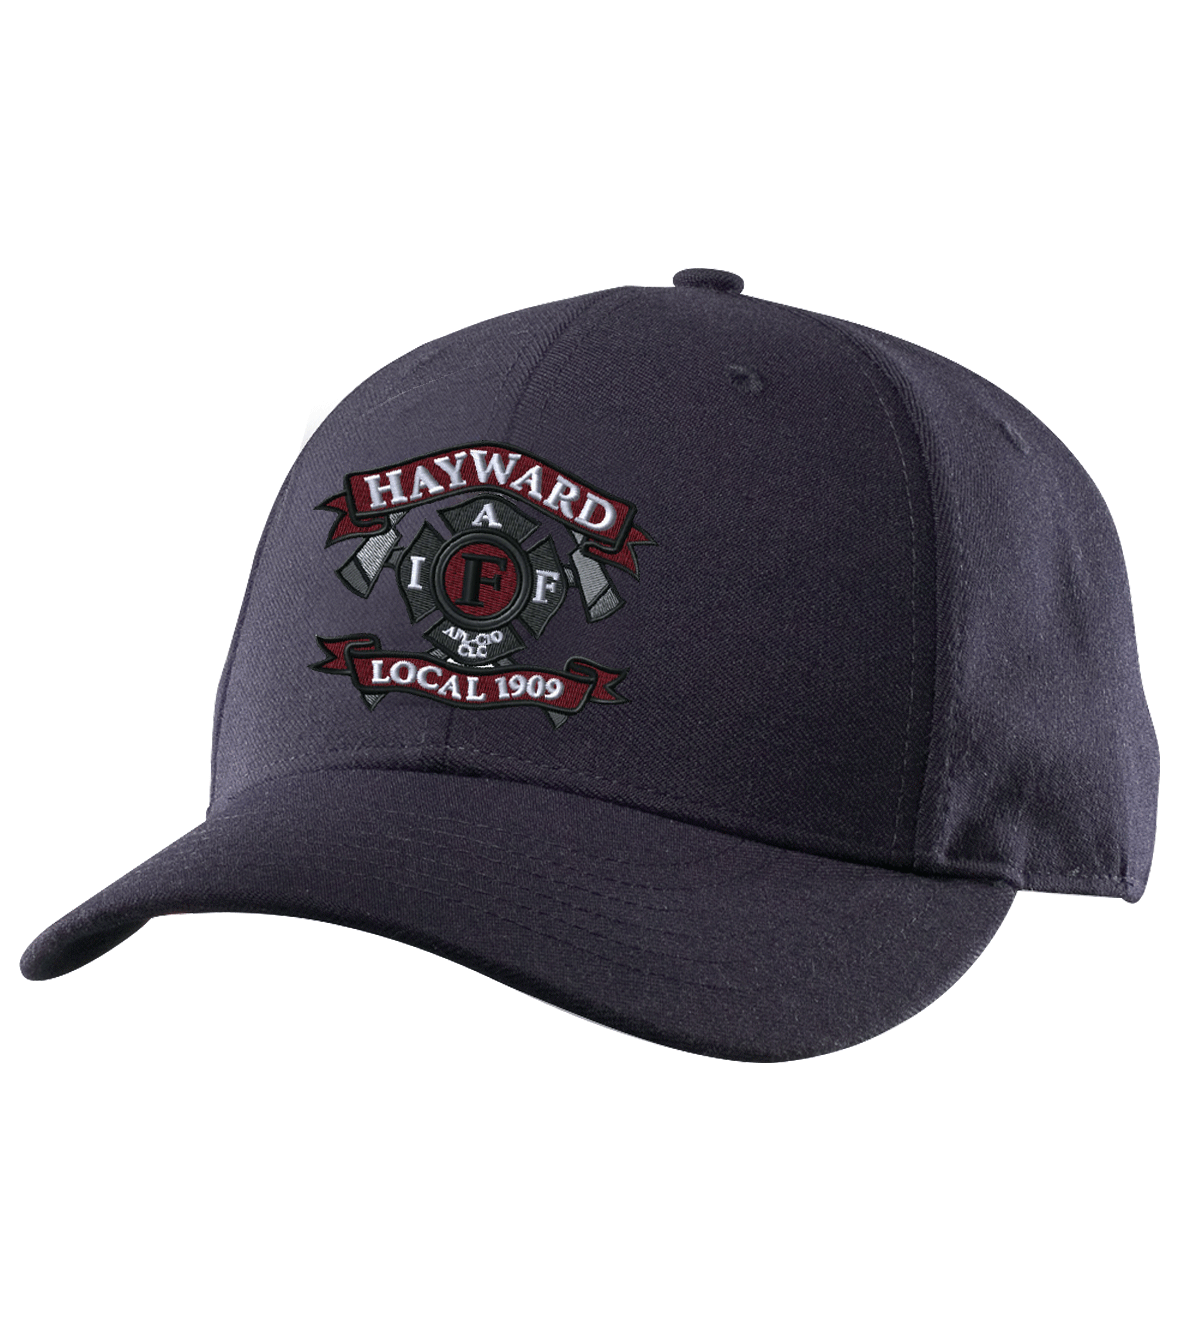 Local 1909 Fitted Cap